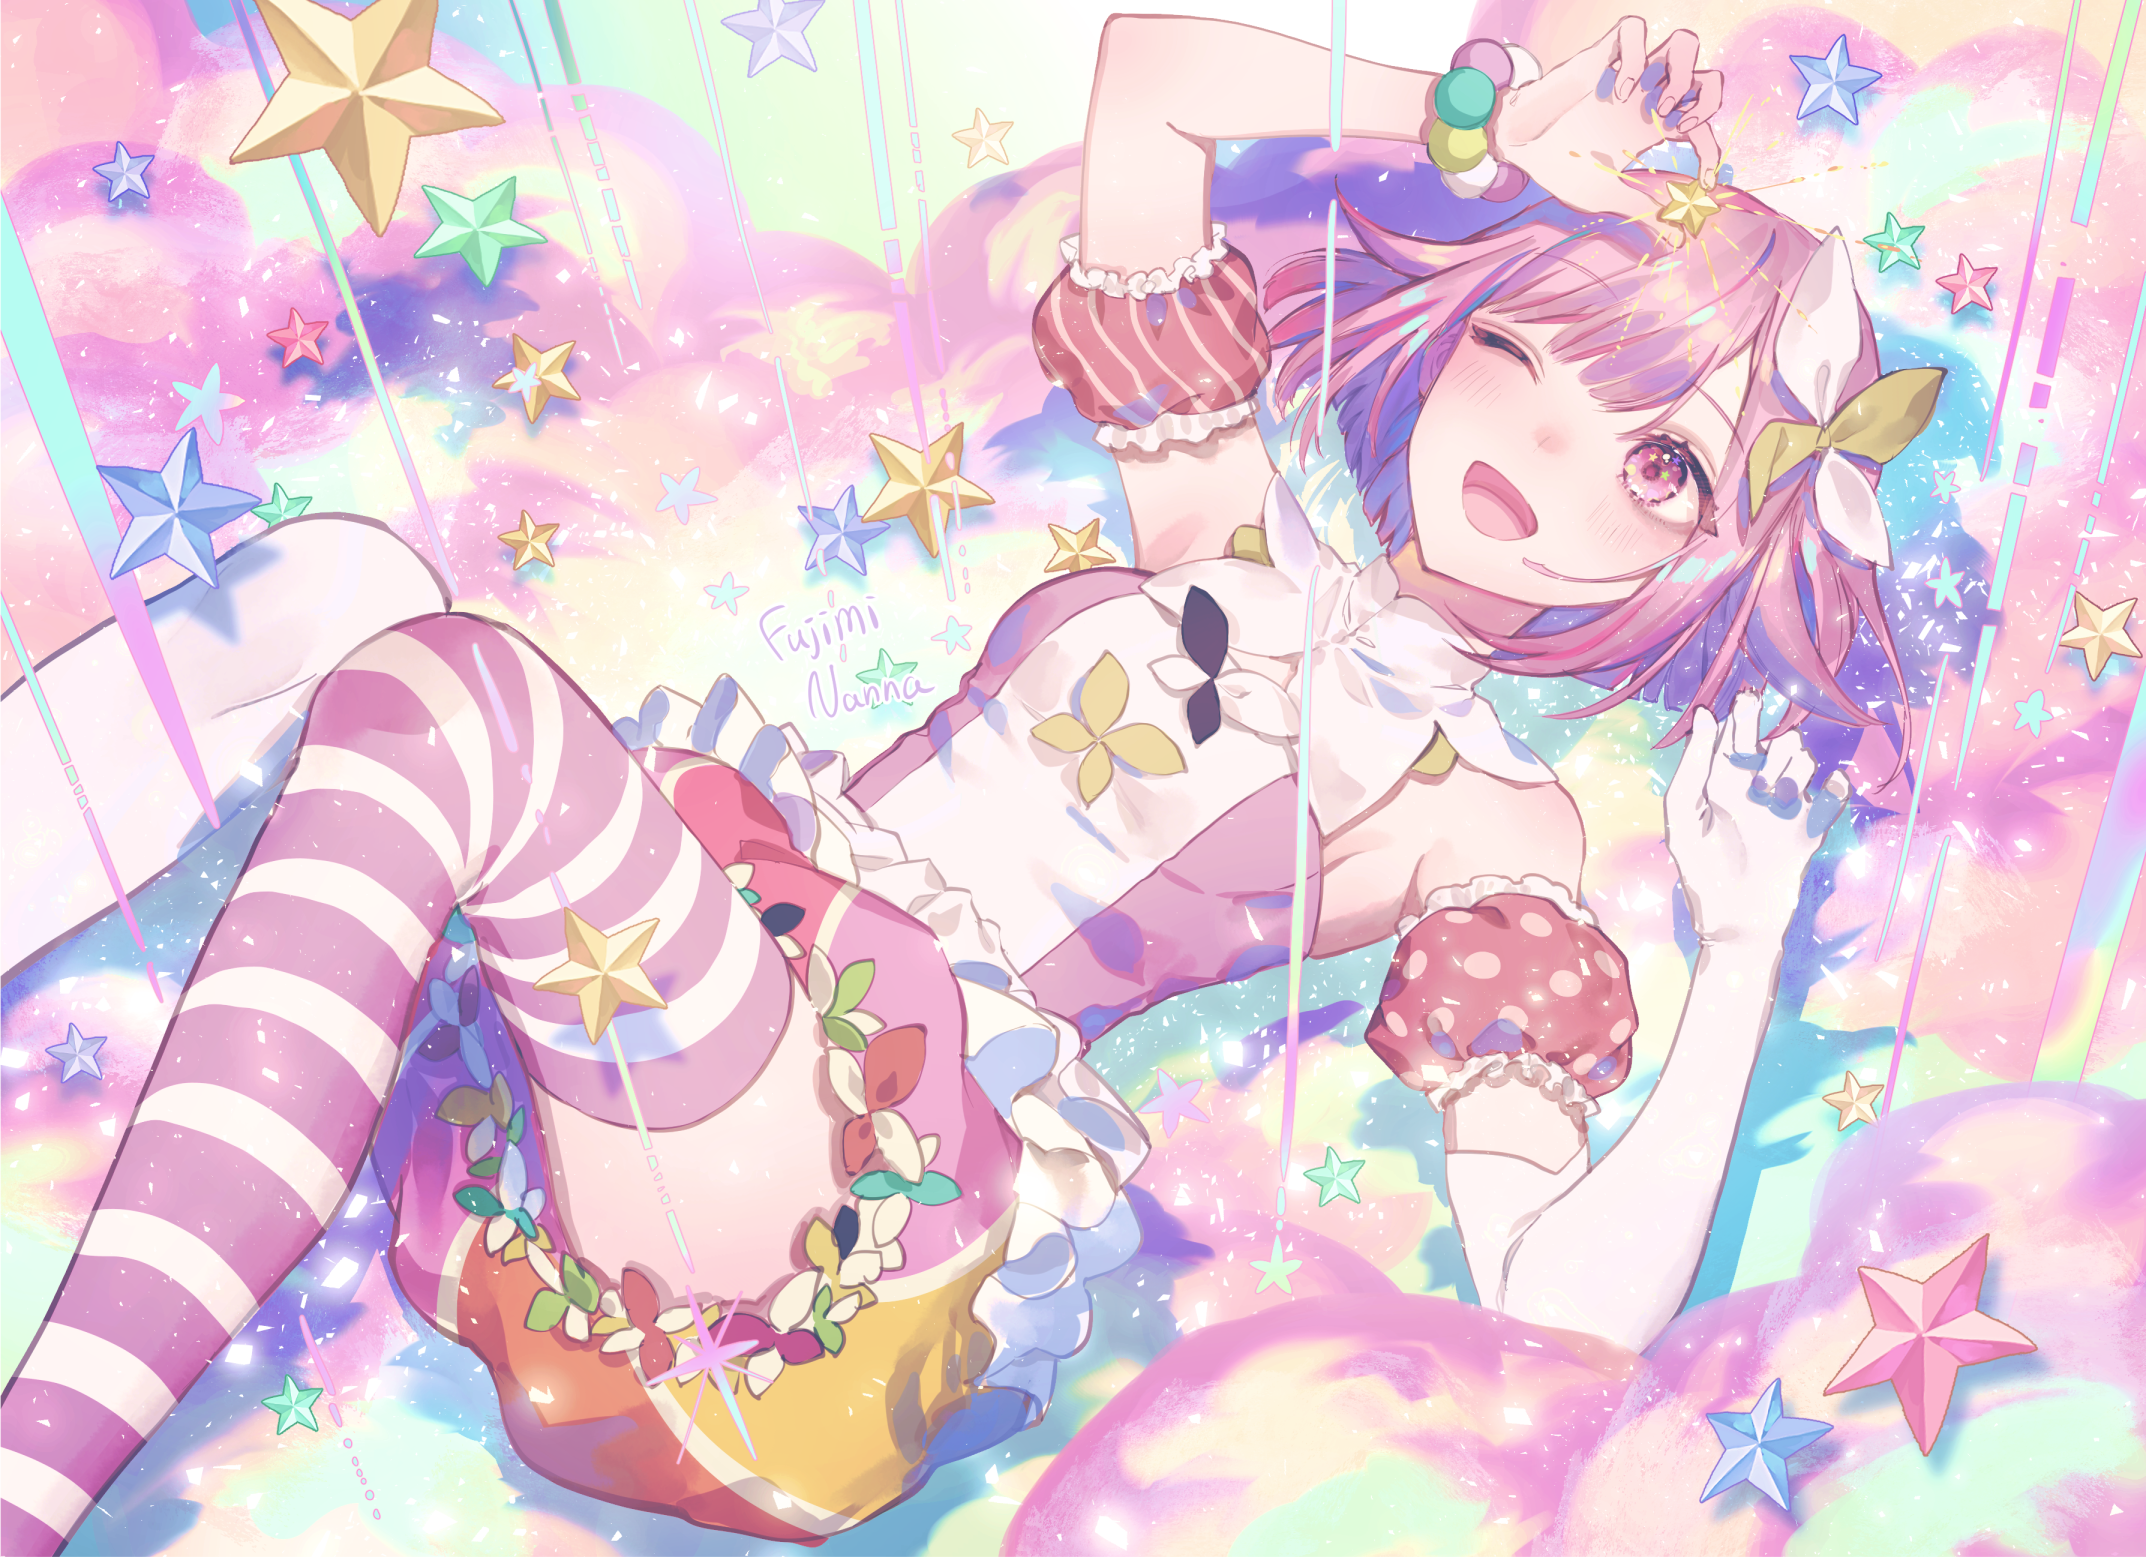 Anime 2146x1557 anime anime girls bracelets one eye closed open mouth stockings pink stockings striped stockings colorful stars lying on back